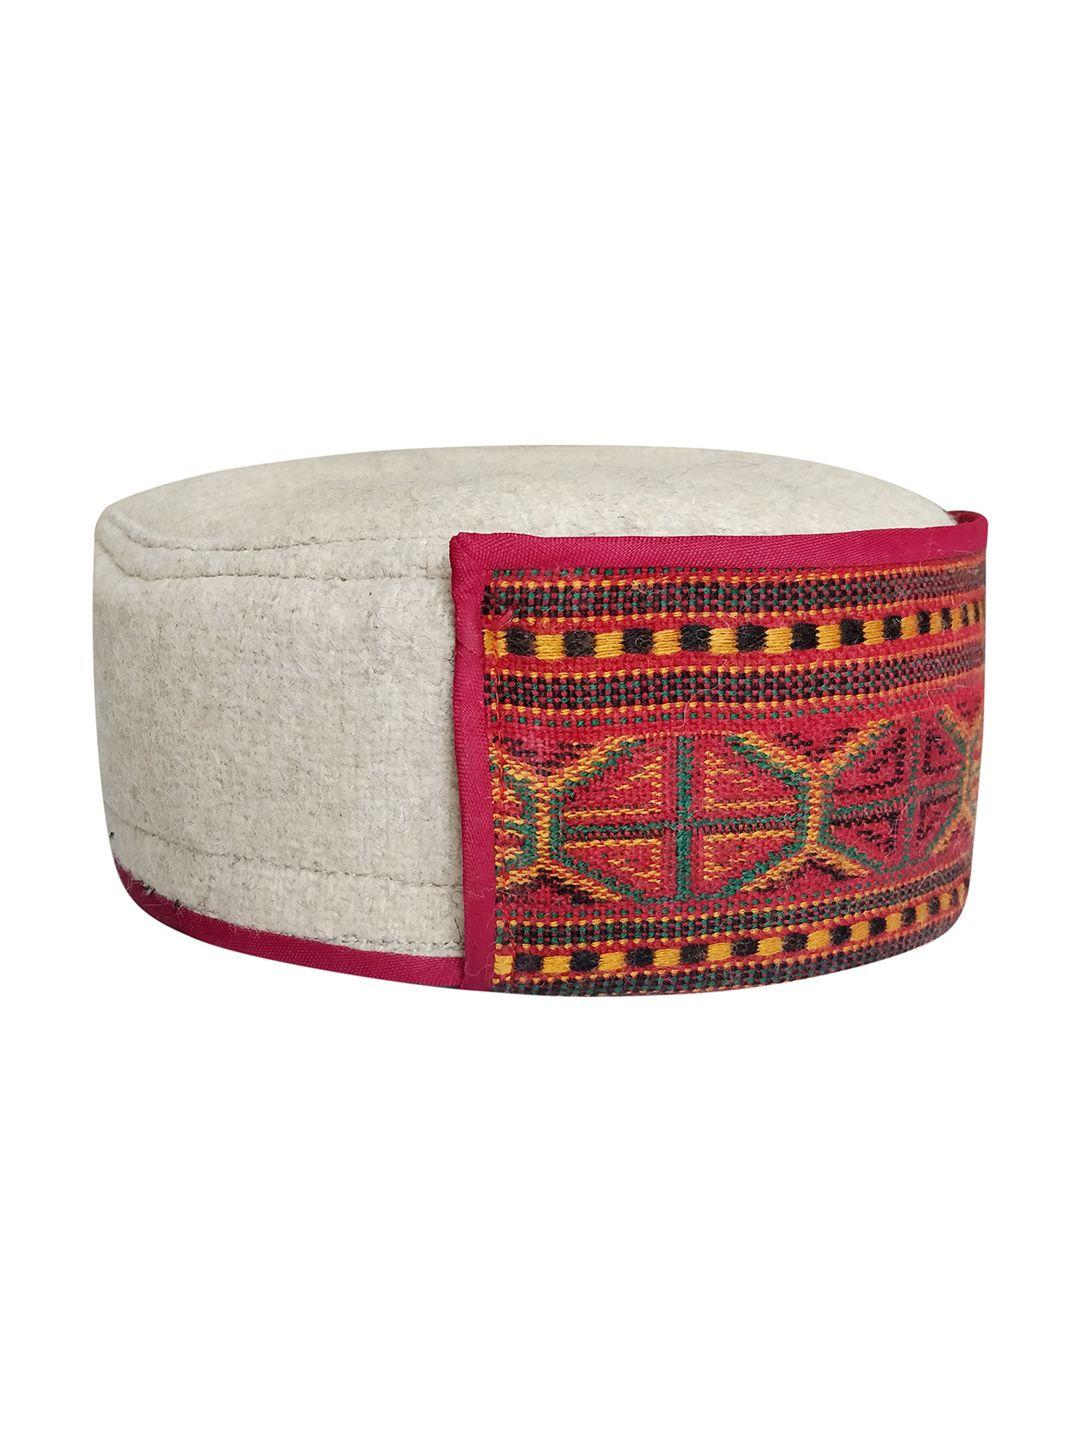 vastraa fusion unisex red & yellow embroidered ascot cap